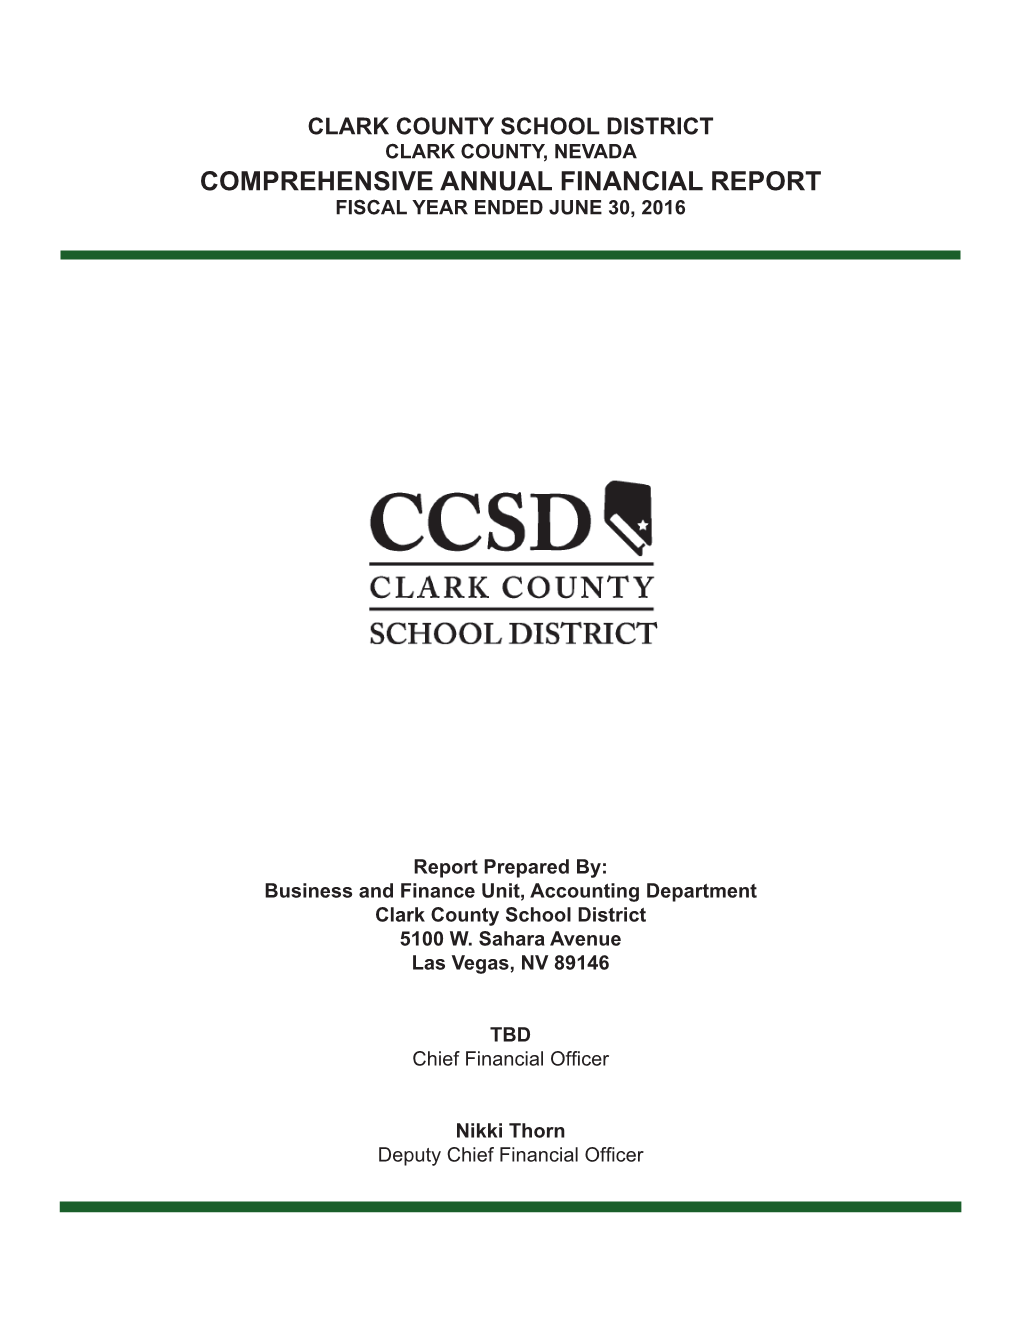 Comprehensive Annual Financial Report Fiscal Year Ended June 30, 2016